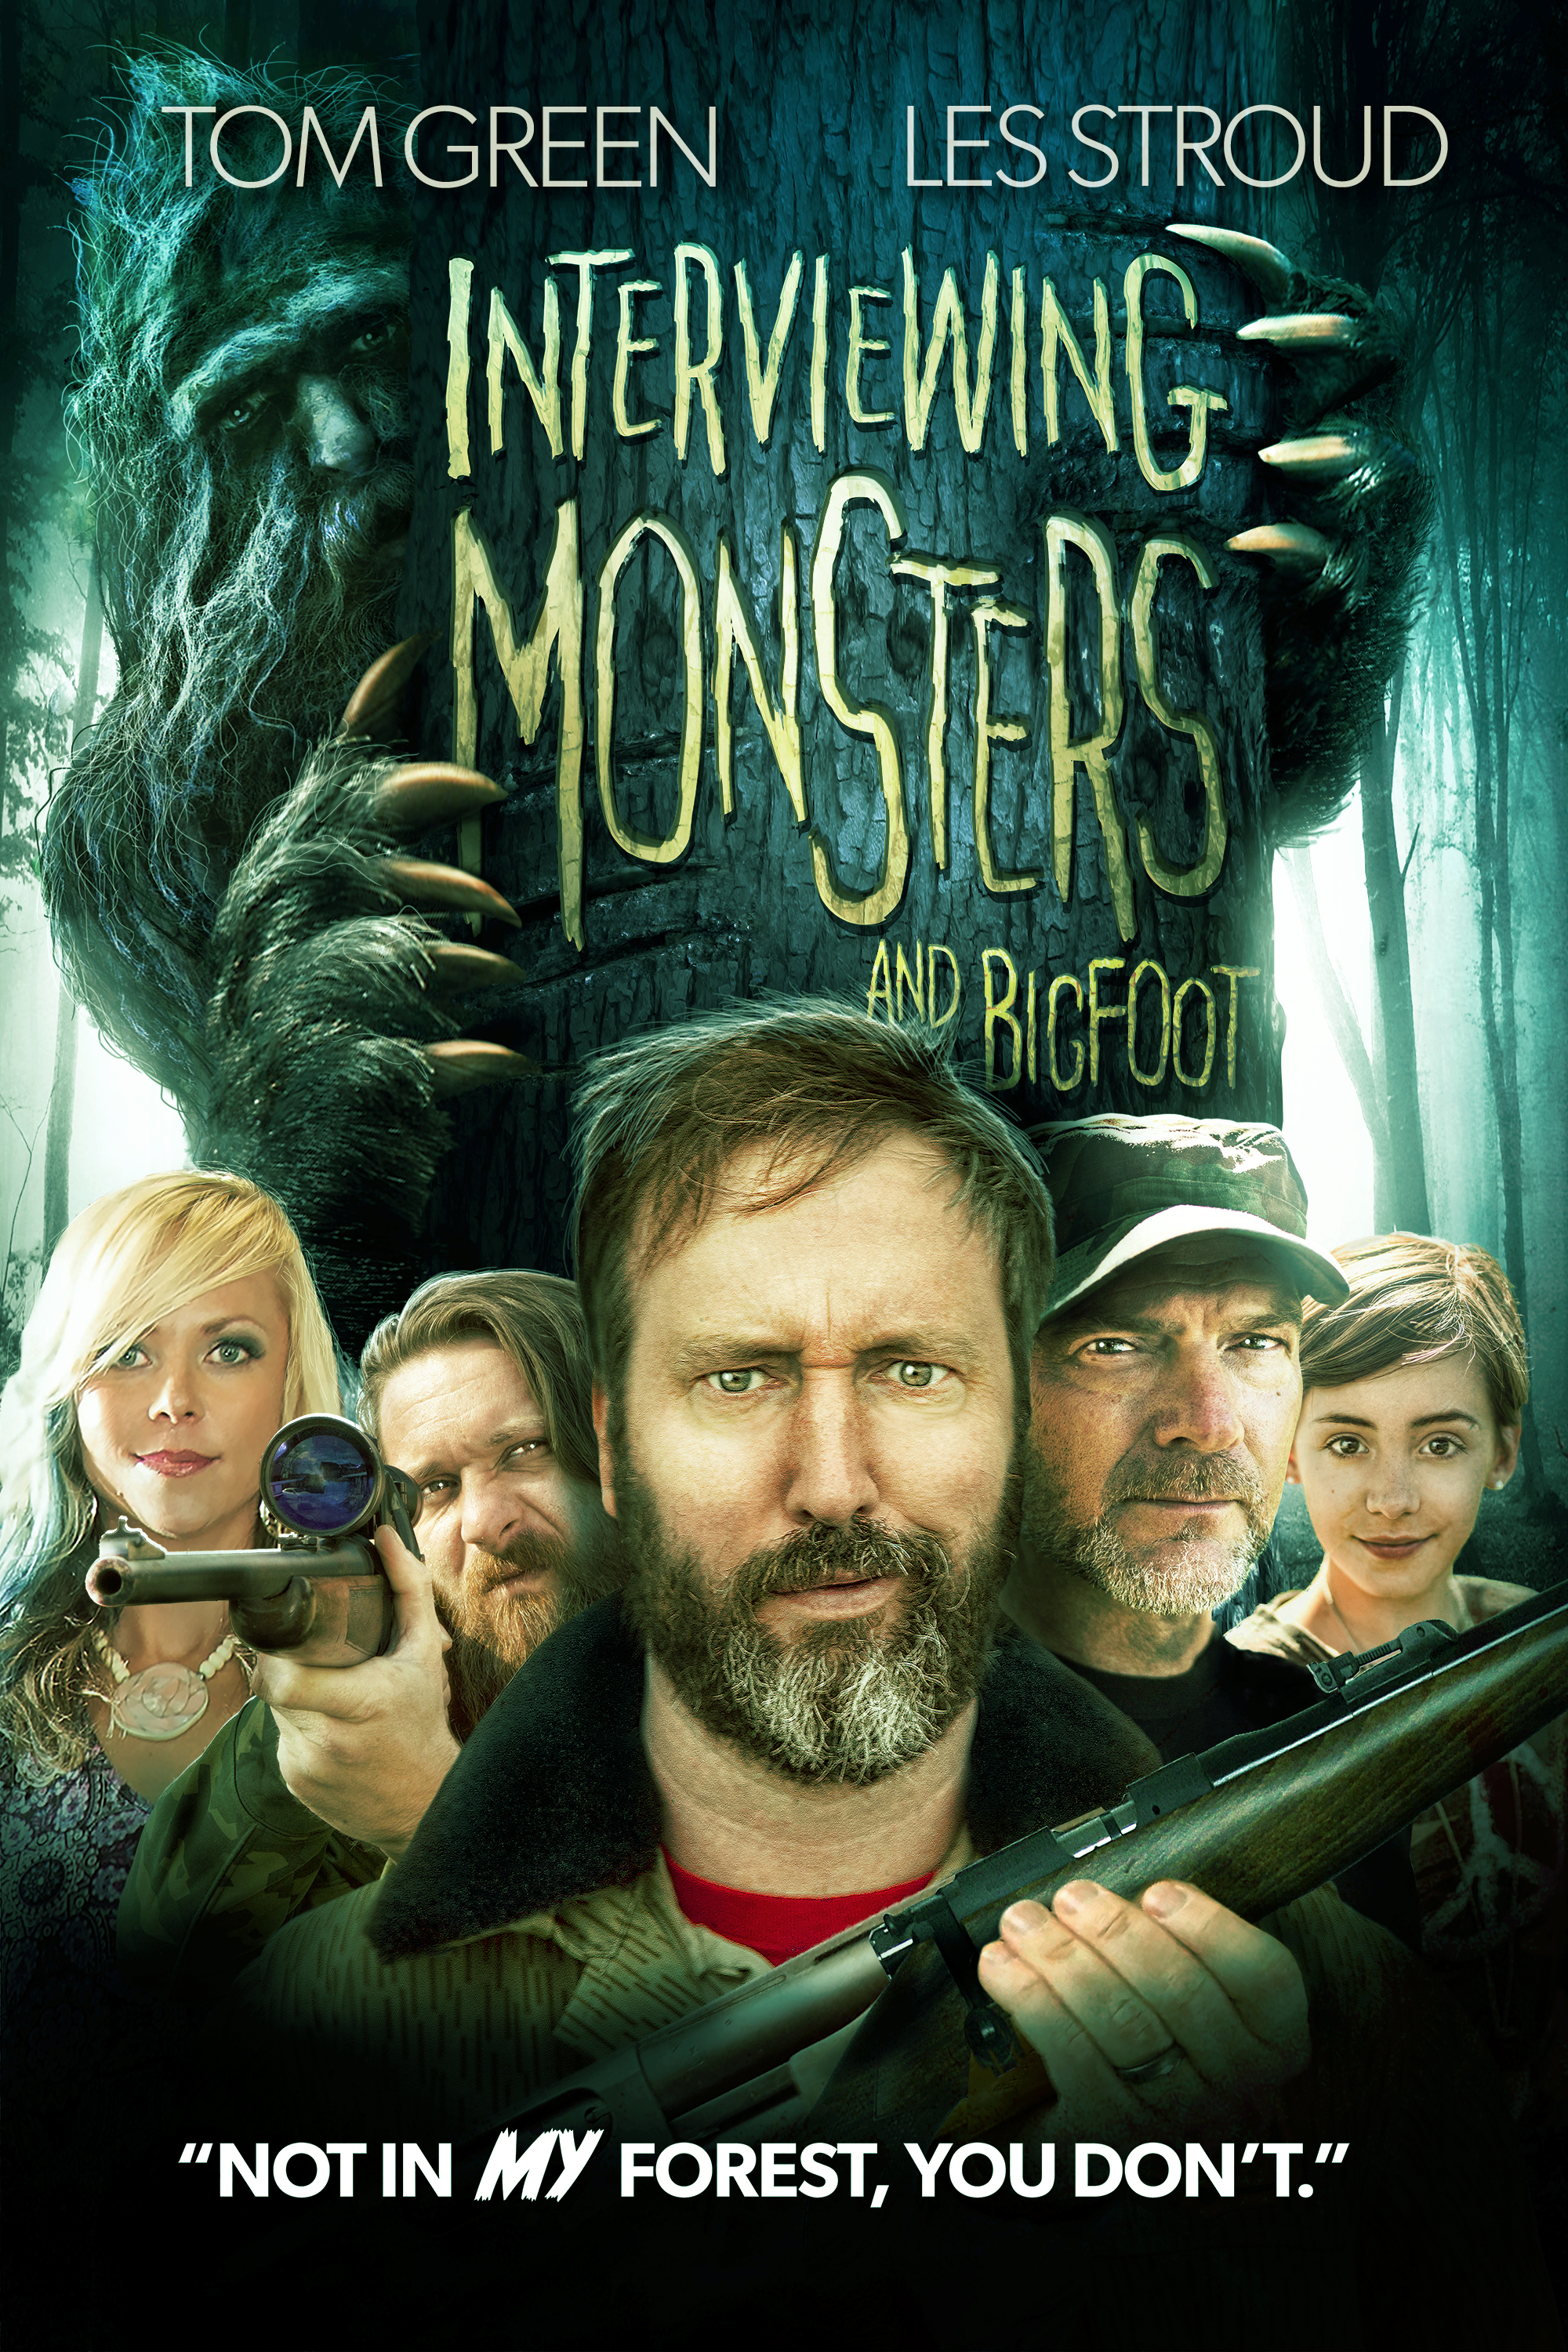 Interviewing Monsters and Bigfoot (2019) starring Tom Green on DVD on DVD